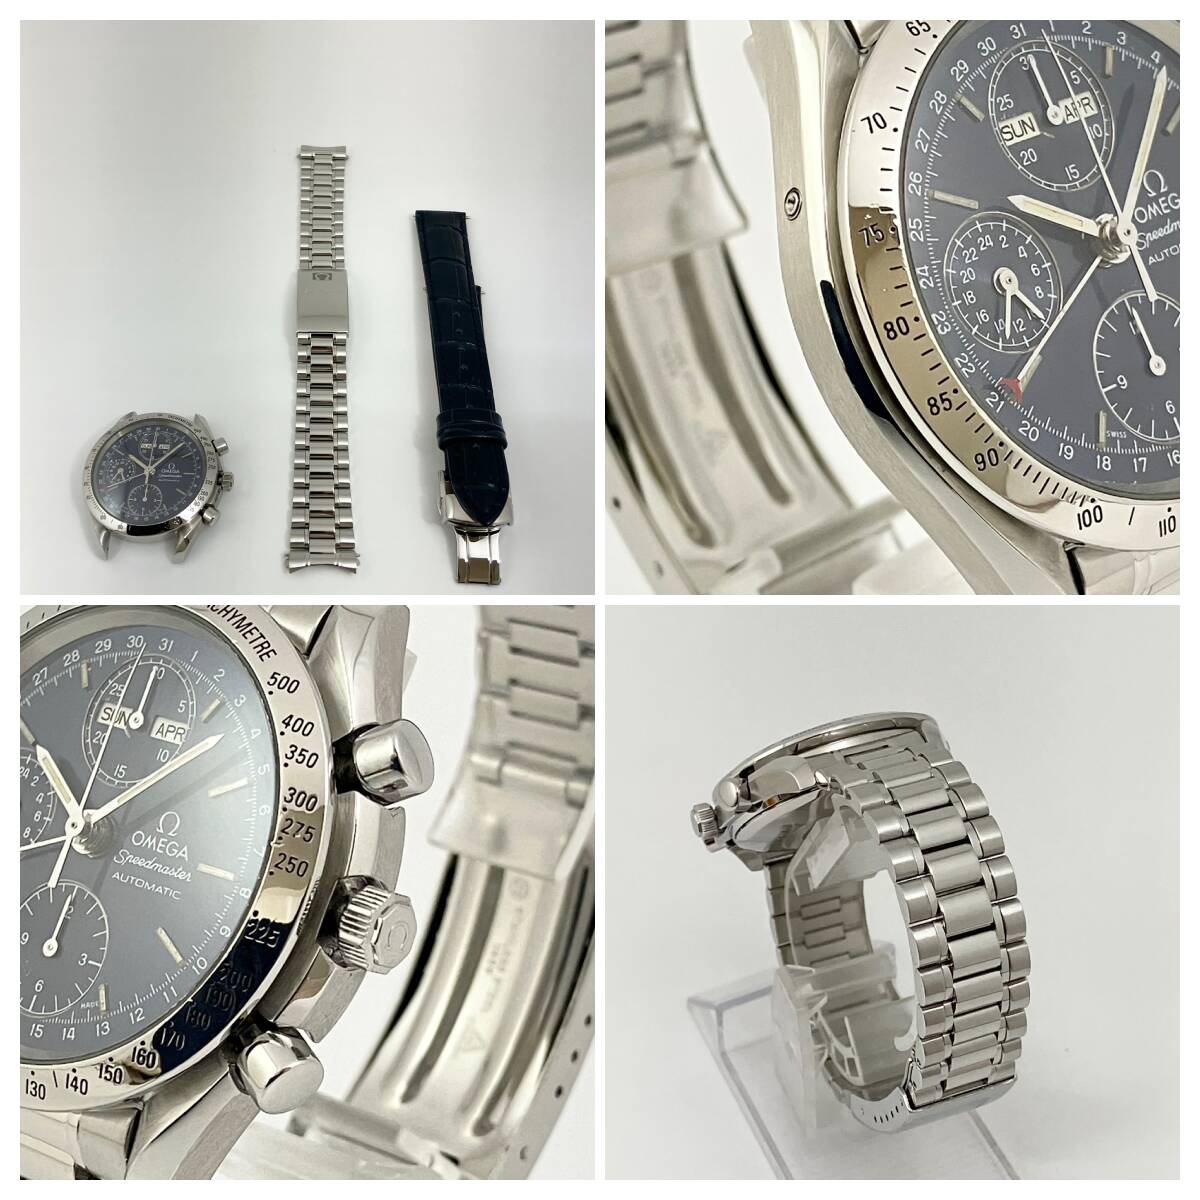  accessory all part, belt 2 kind attaching *OH ending ultimate beautiful goods. Omega * Speedmaster * clock * Triple calendar * navy record *3521-80*